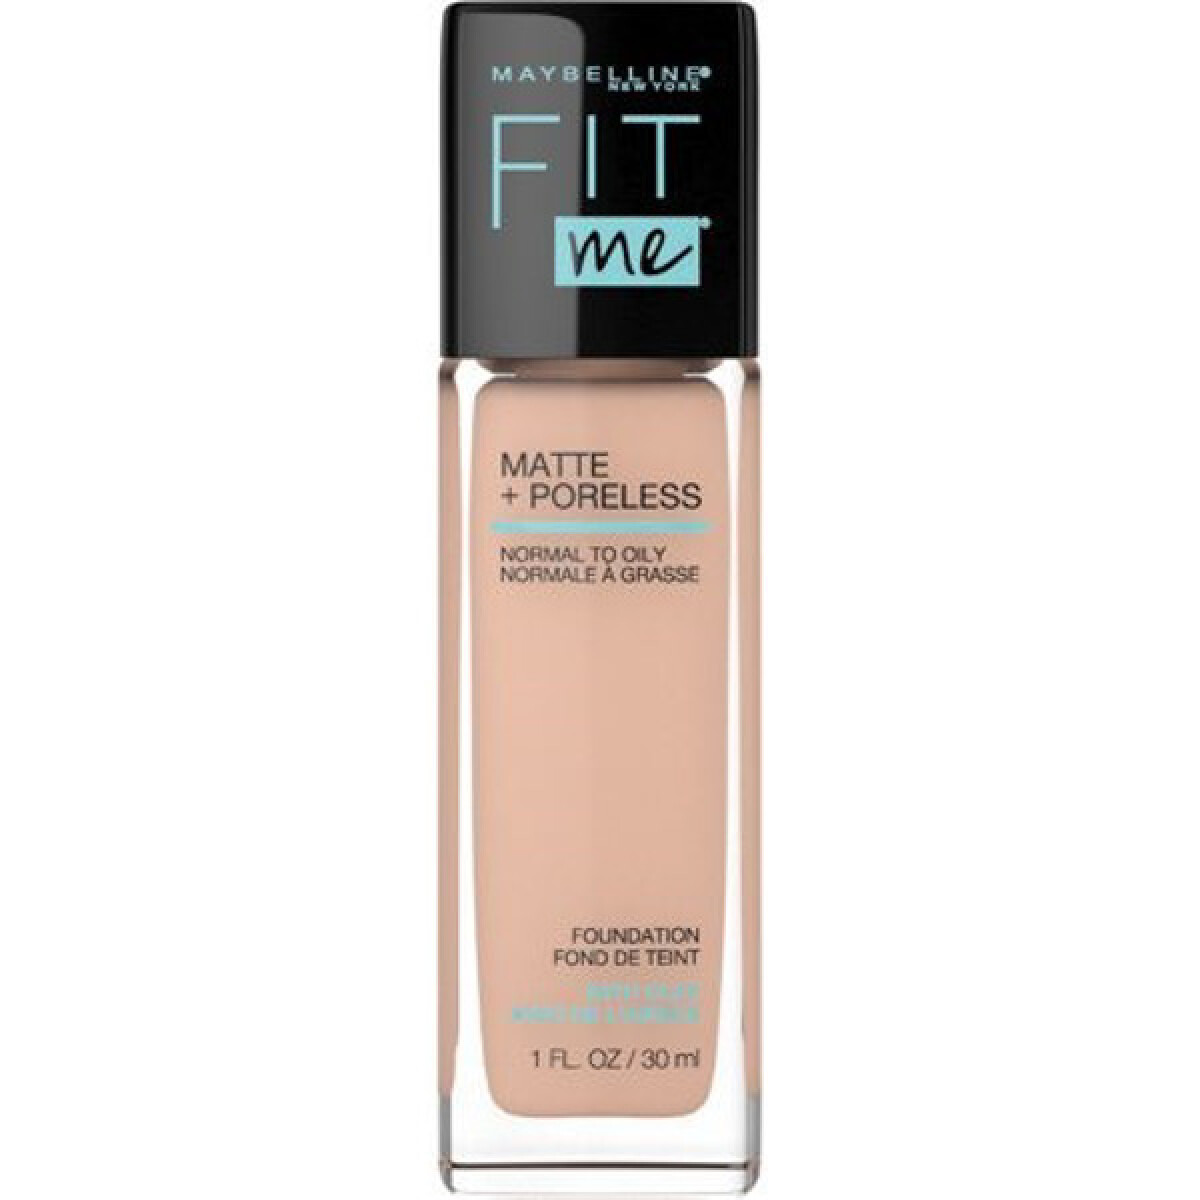 BASE MAYBELLINE FIT ME 235 MATE + PORELESS NORMAL TO OIL 